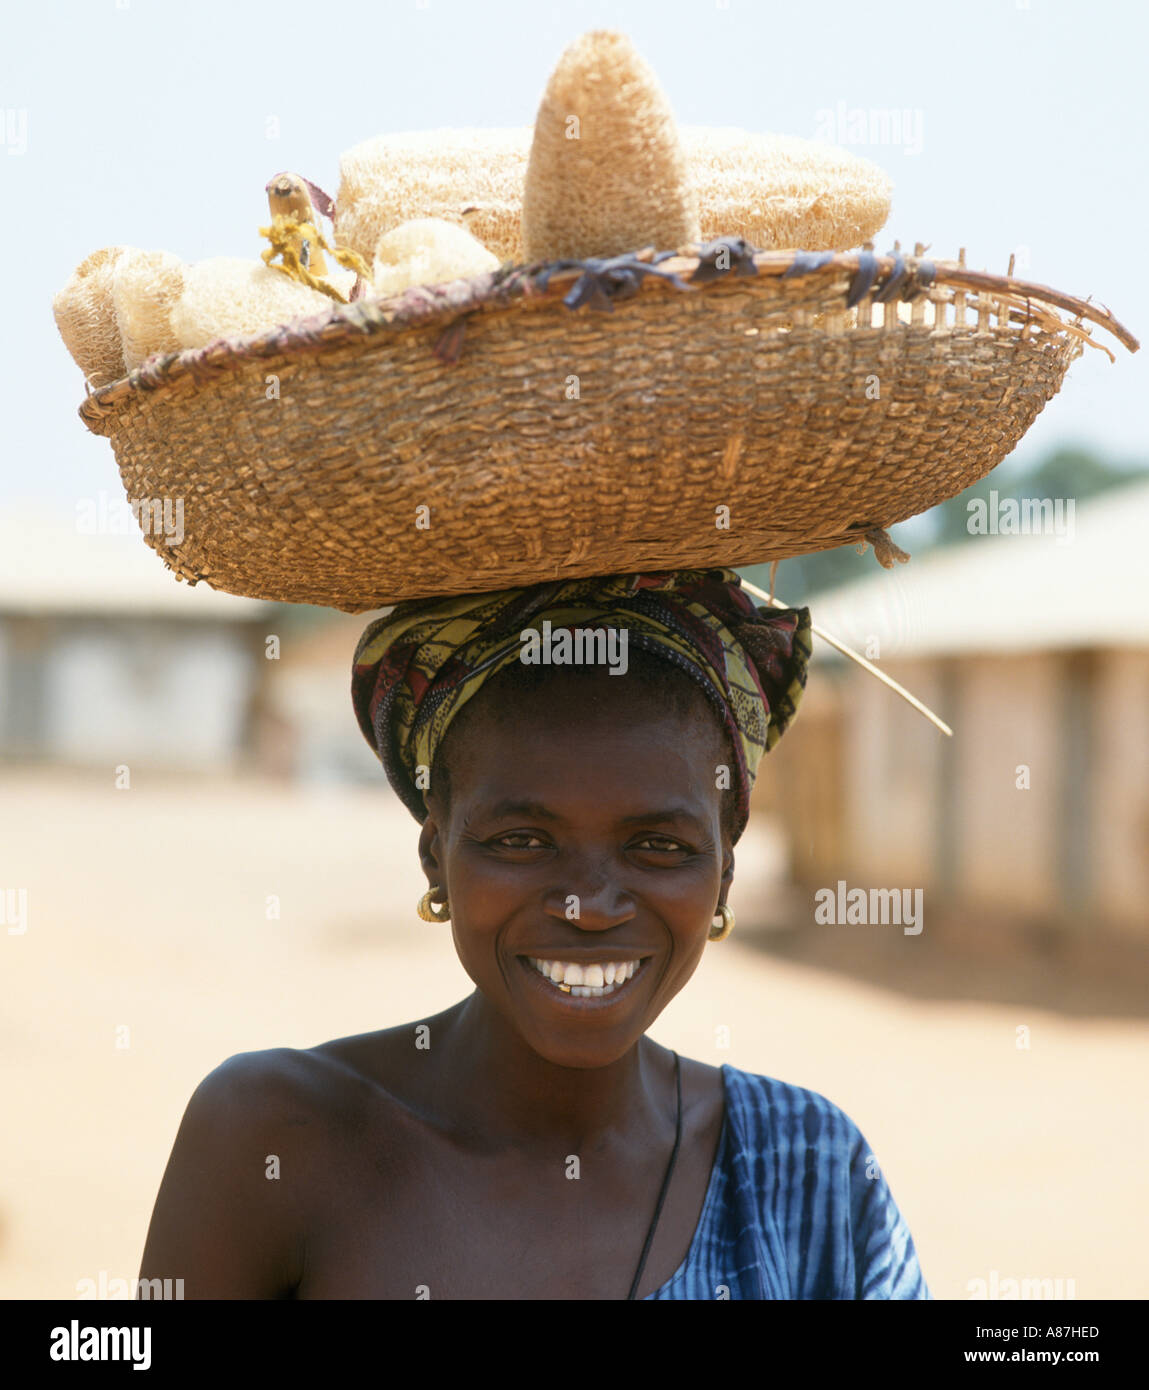 Sponge seller in the native village of Juffure (Roots Village), The Gambia,  West Africa Stock Photo - Alamy